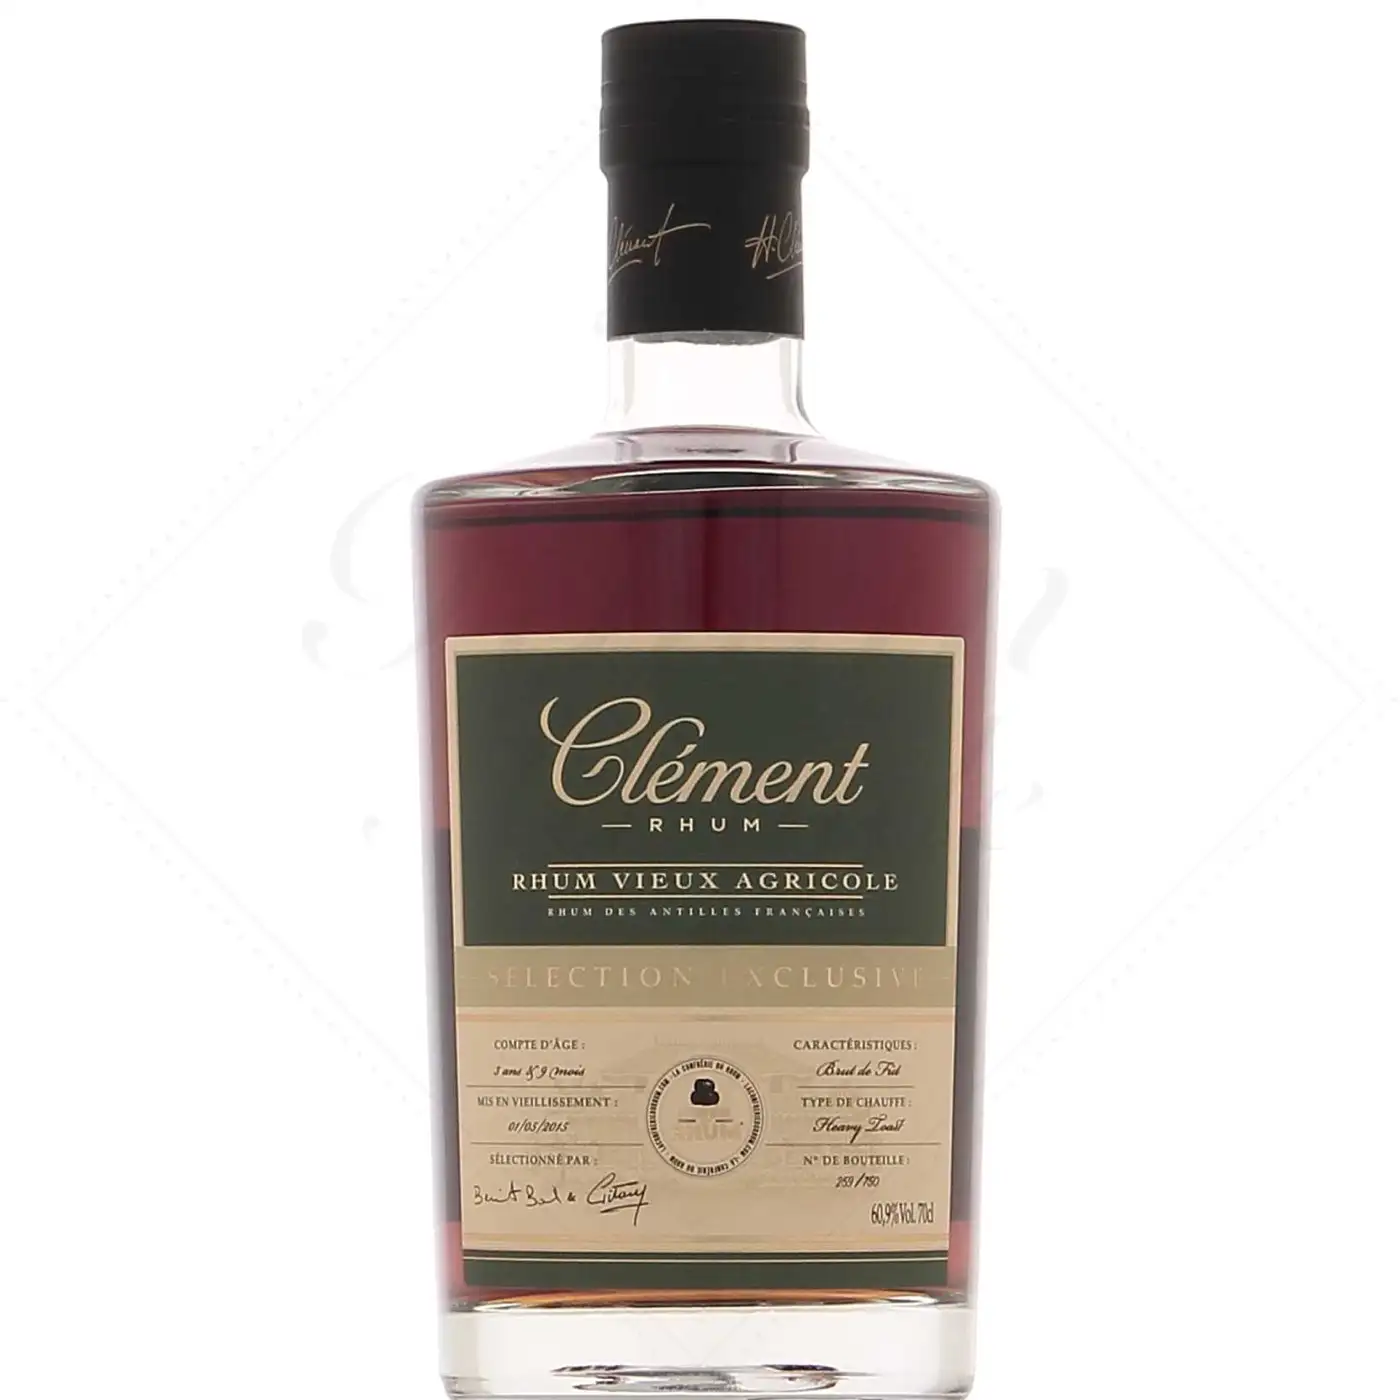 Image of the front of the bottle of the rum Clément Selection Exclusive